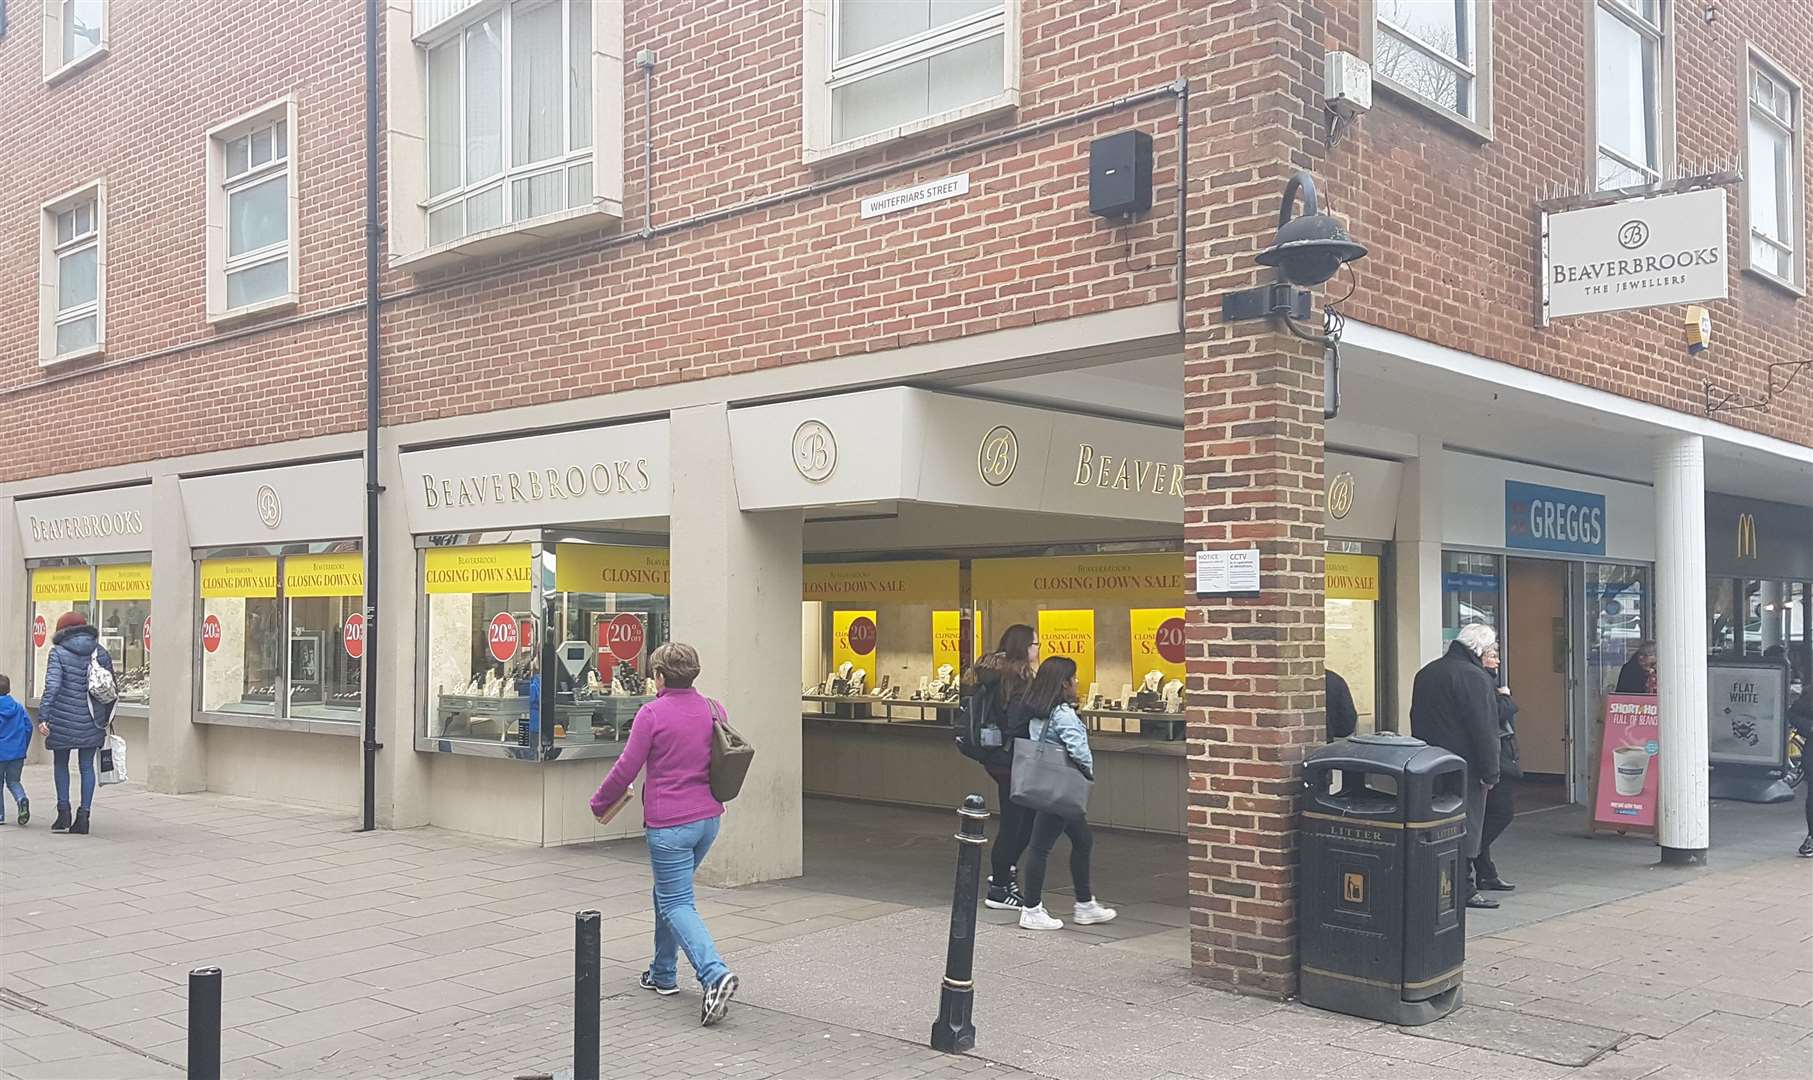 The city centre store will close in June